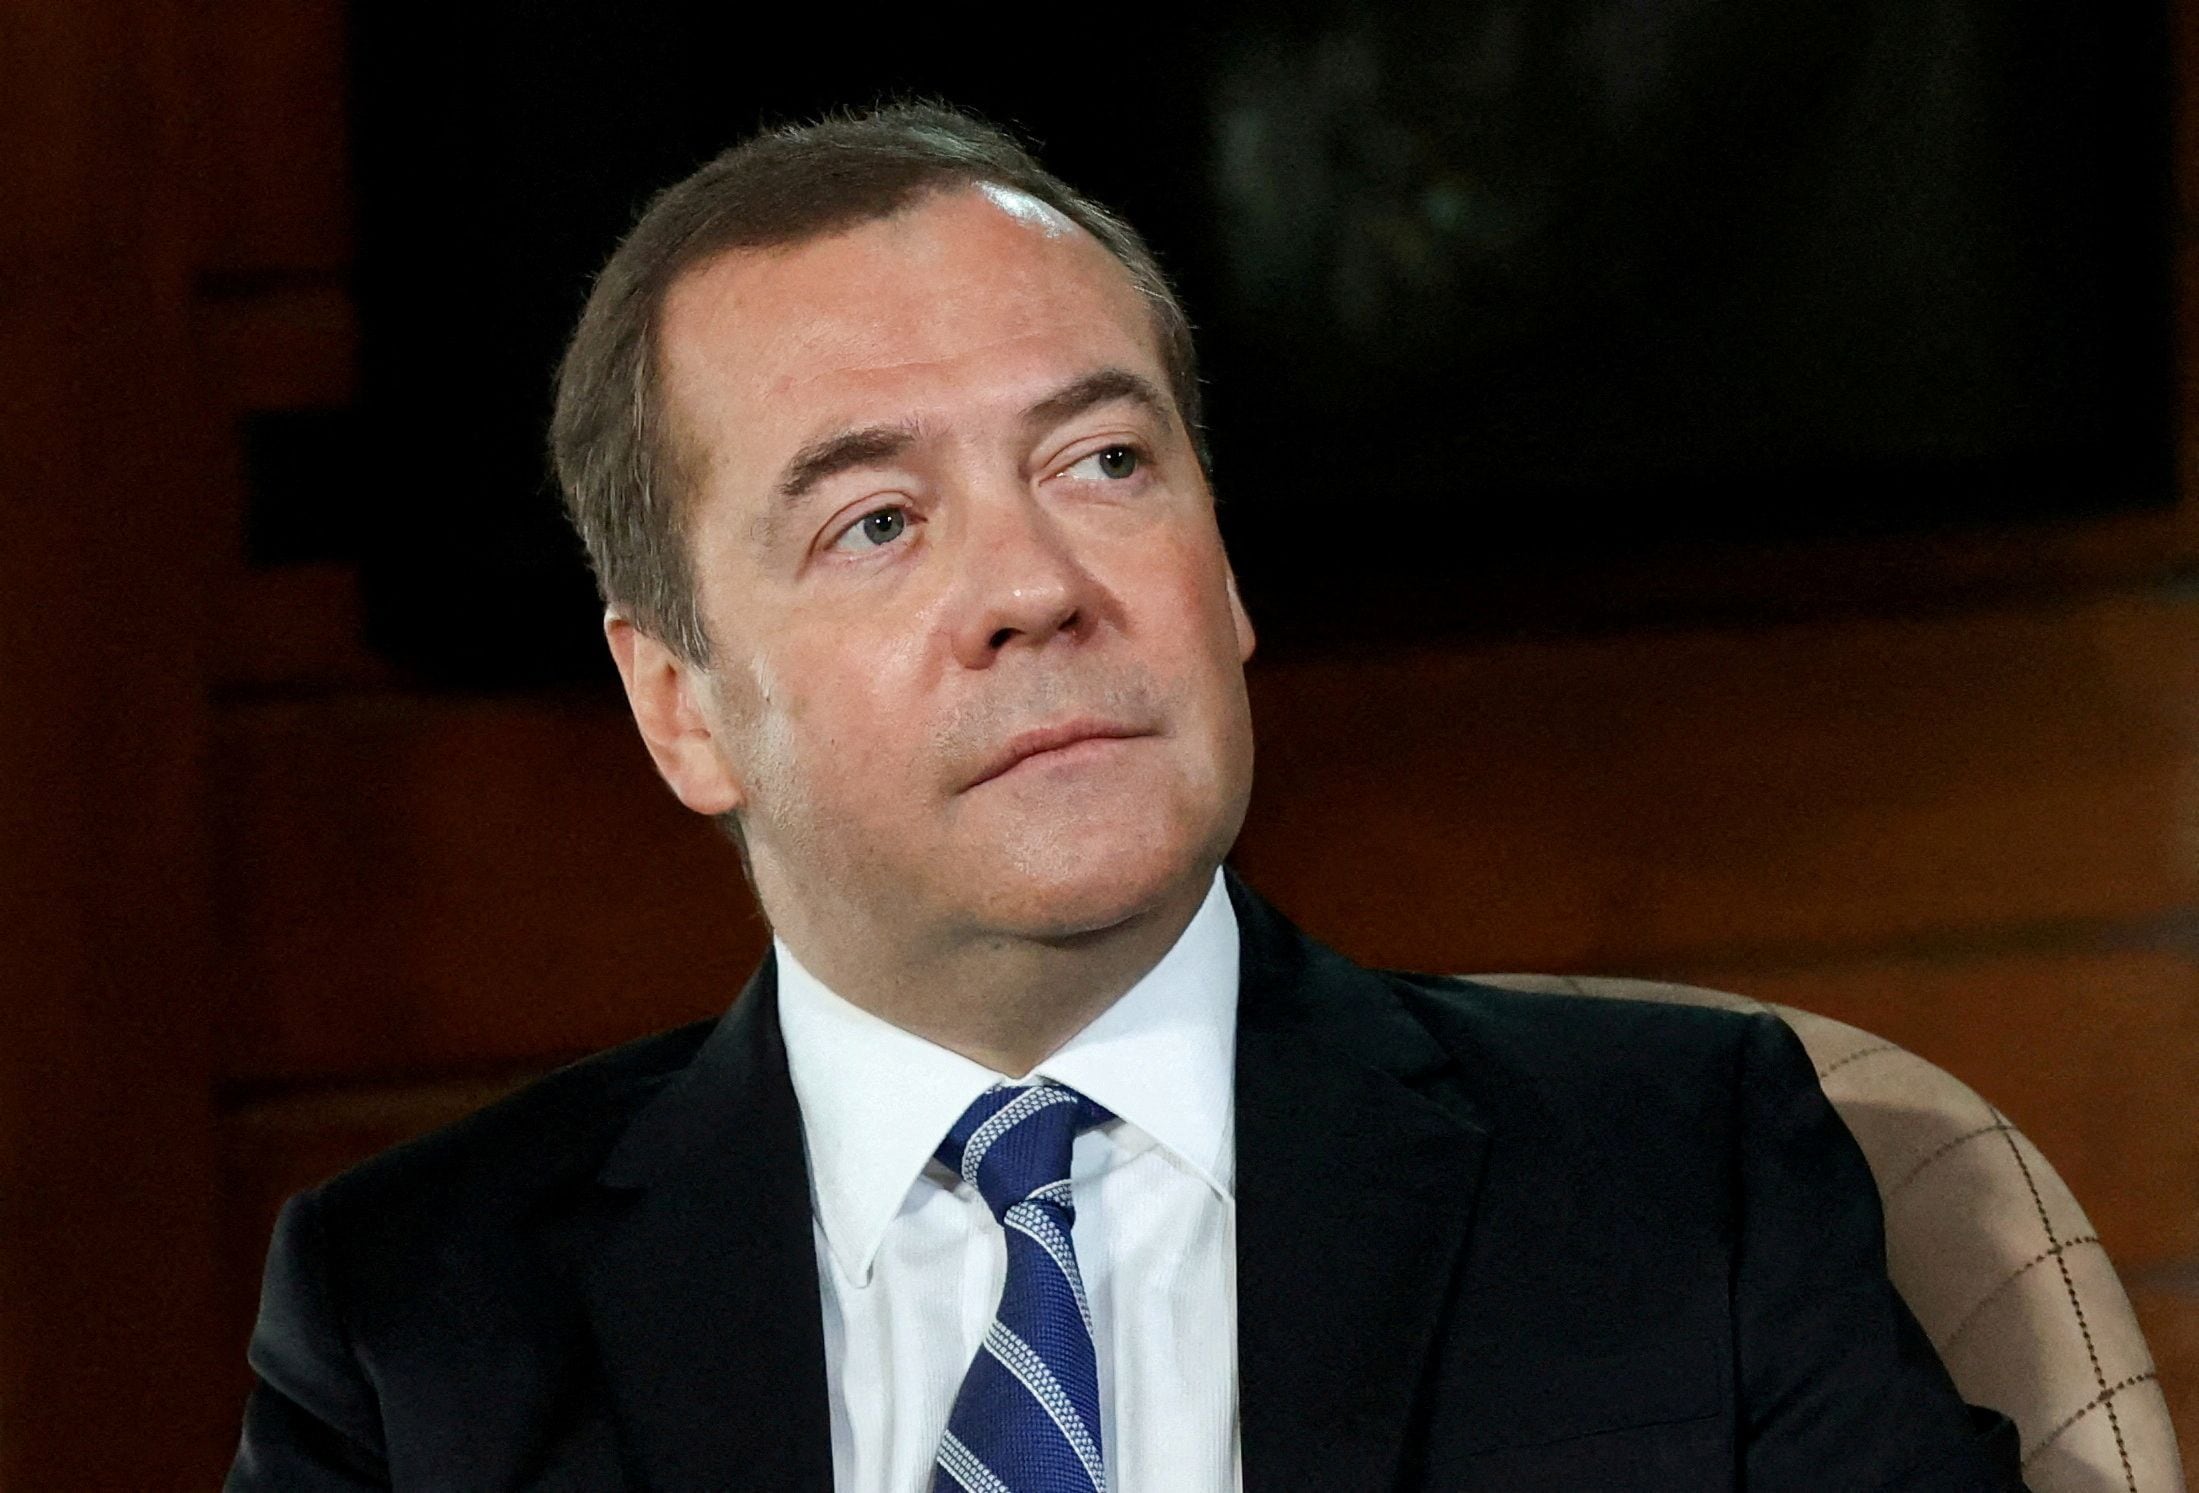 FILE PHOTO: Deputy Chairman of Russia's Security Council Dmitry Medvedev gives an interview at the Gorki state residence outside Moscow, Russia on January 25, 2022. Picture taken January 25, 2022. Sputnik/Yulia Zyryanova/Pool via REUTERS/File Photo